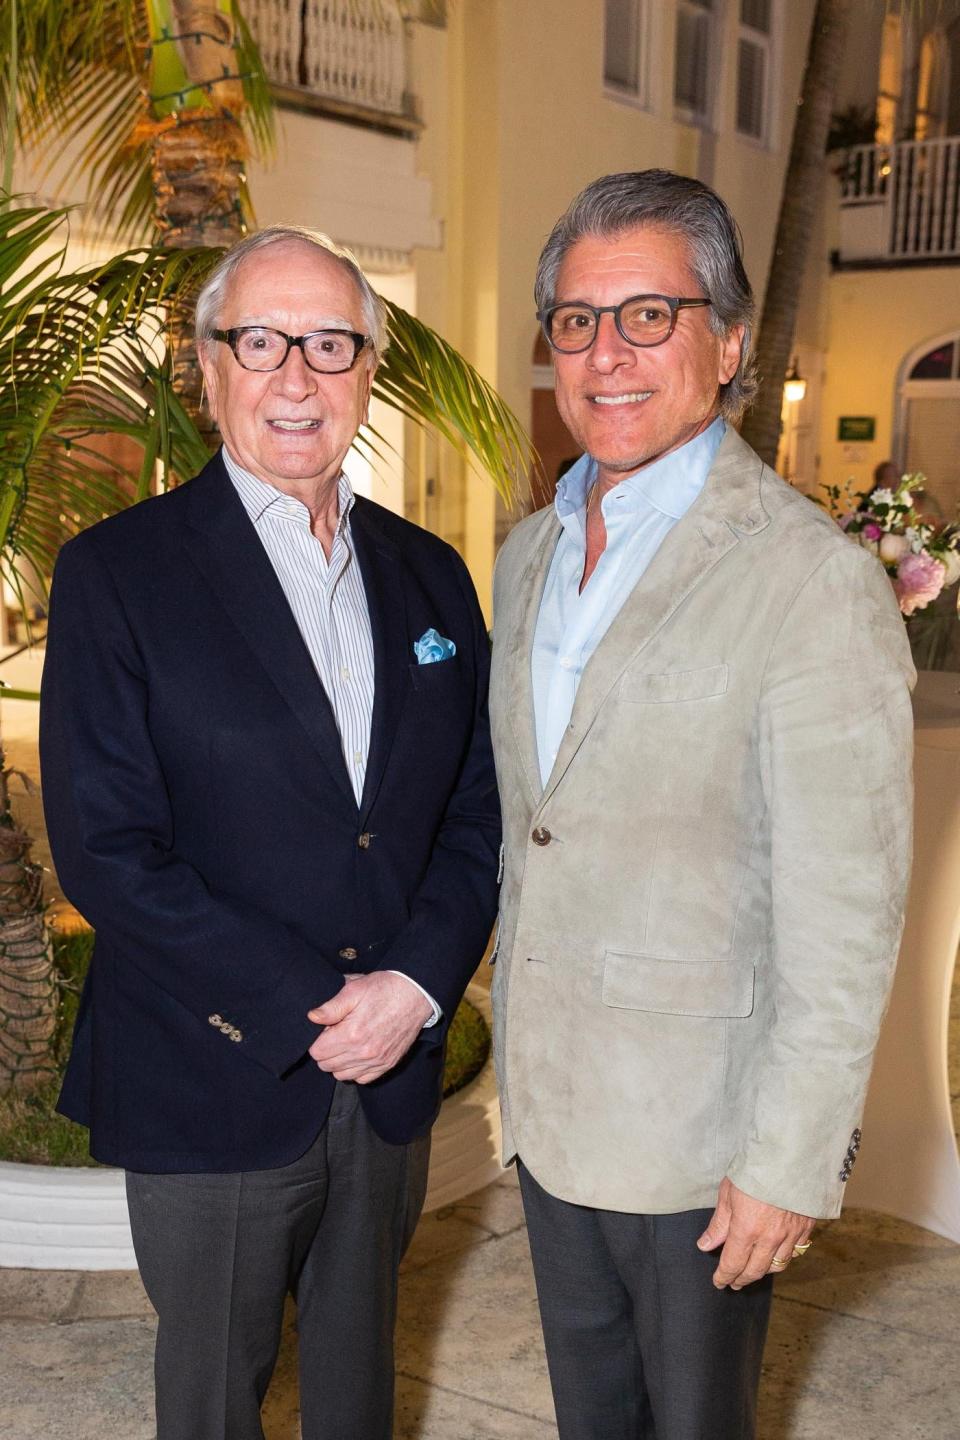 James Borynack and Adolfo Zaralegui at the American Friends of British Art Reception at Hyde Park Mouldings showroom in the Paramount Building in January. They will be the honorary chairmen at the Urban Wildlife Rescue Project this coming Jan. 10 at the Findlay Gallery.